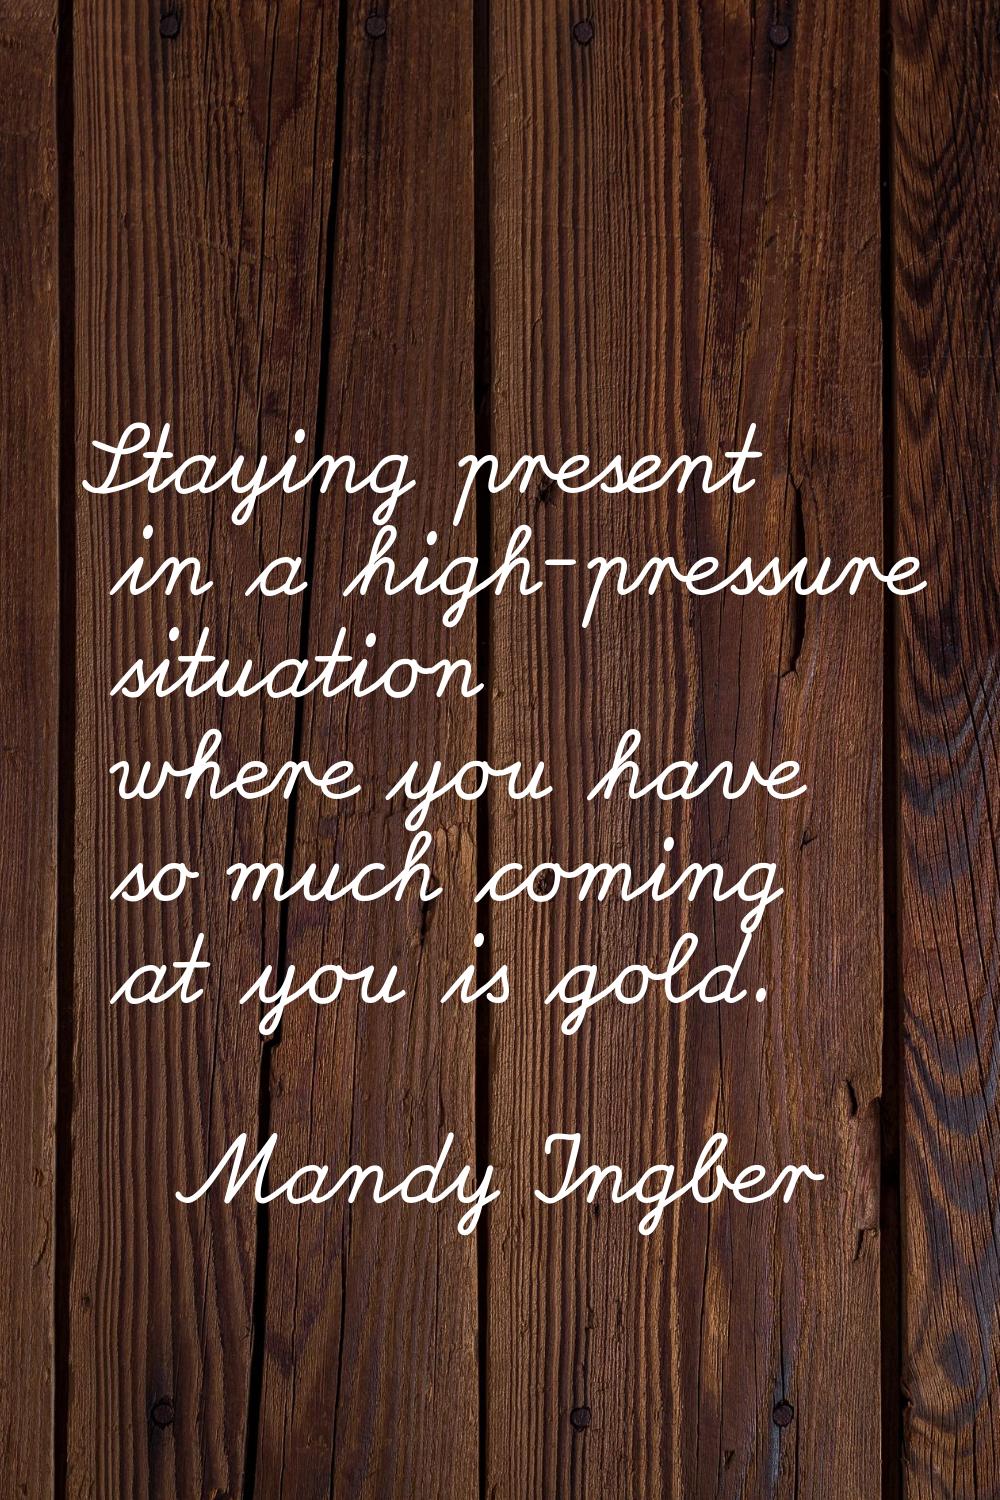 Staying present in a high-pressure situation where you have so much coming at you is gold.